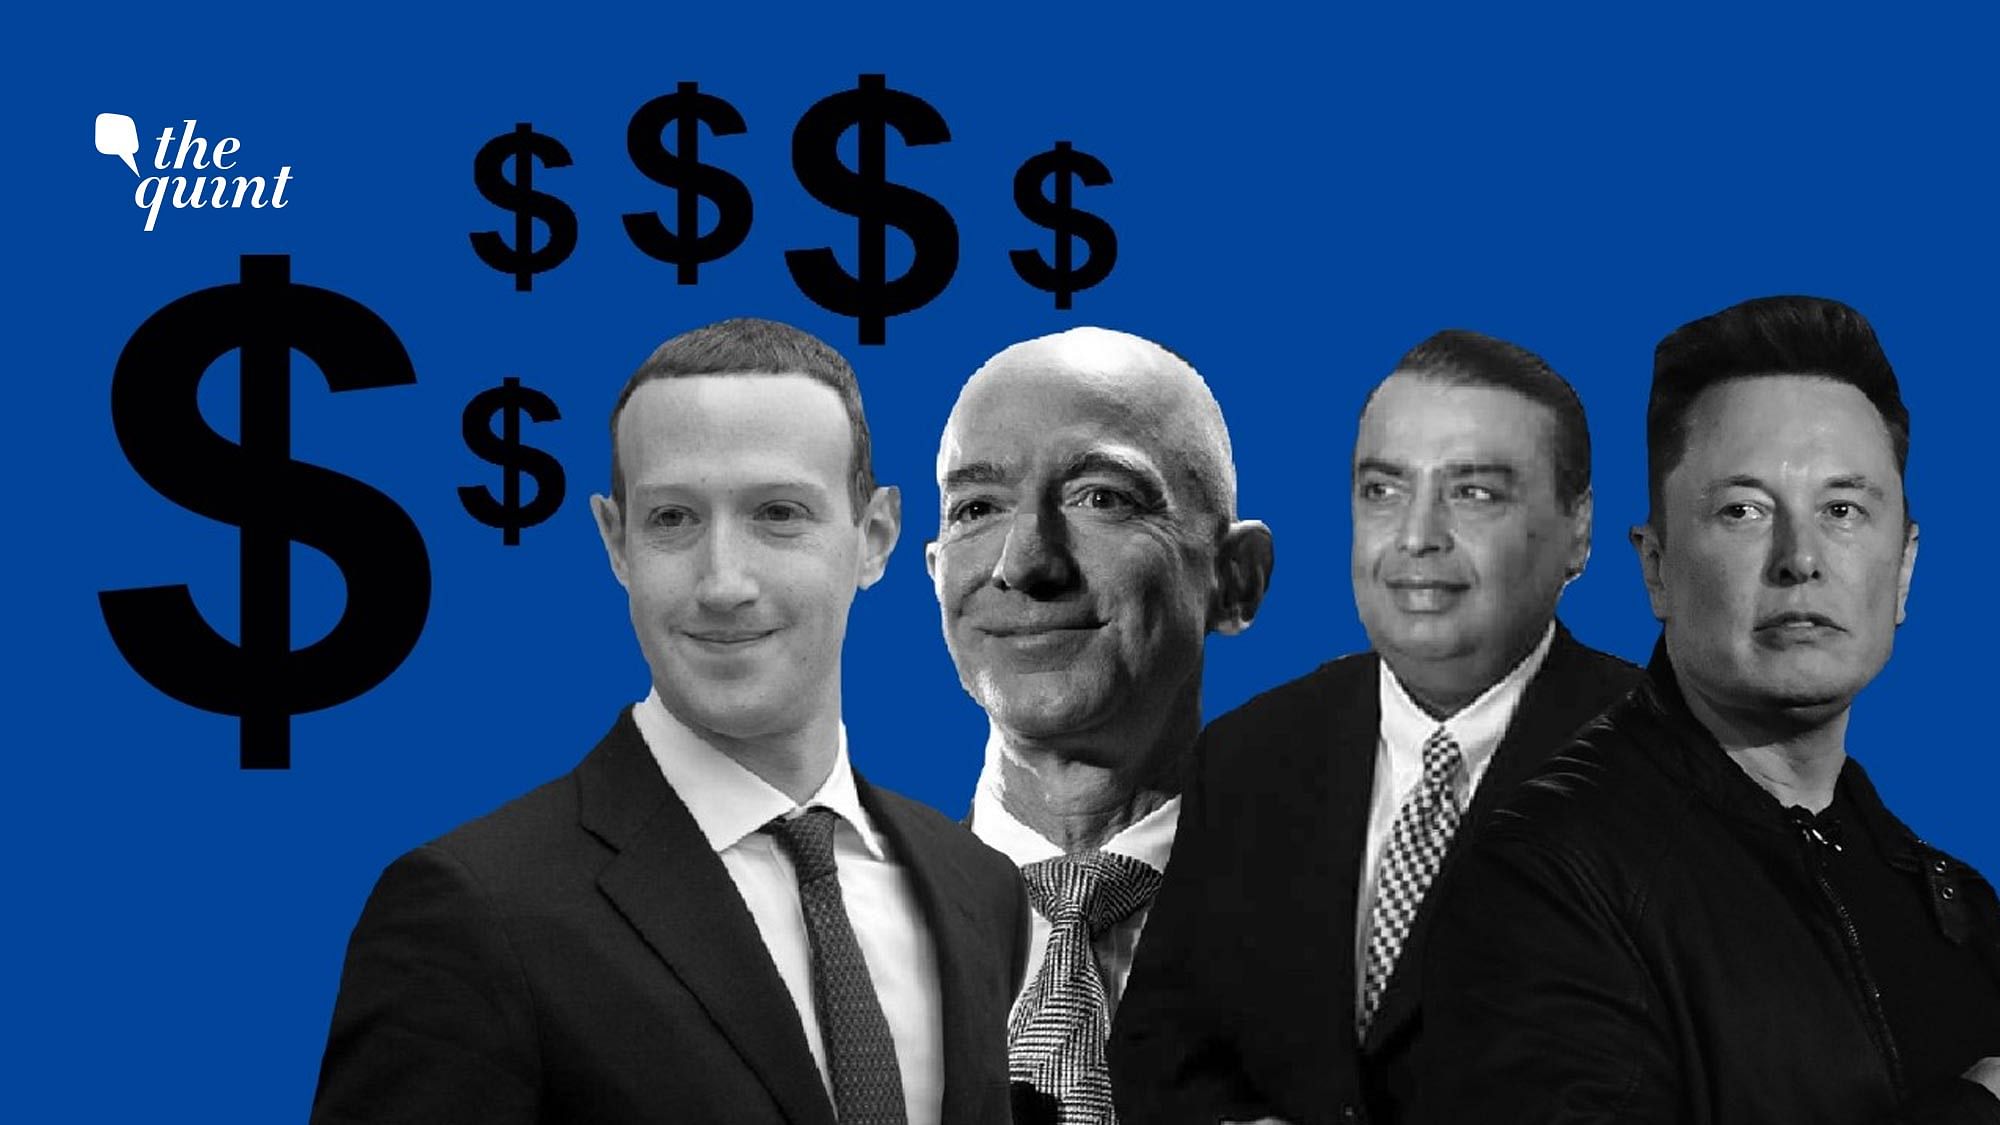 Jeff Bozos, Amazon CEO is the richest person in the world with net worth of $204 billion.